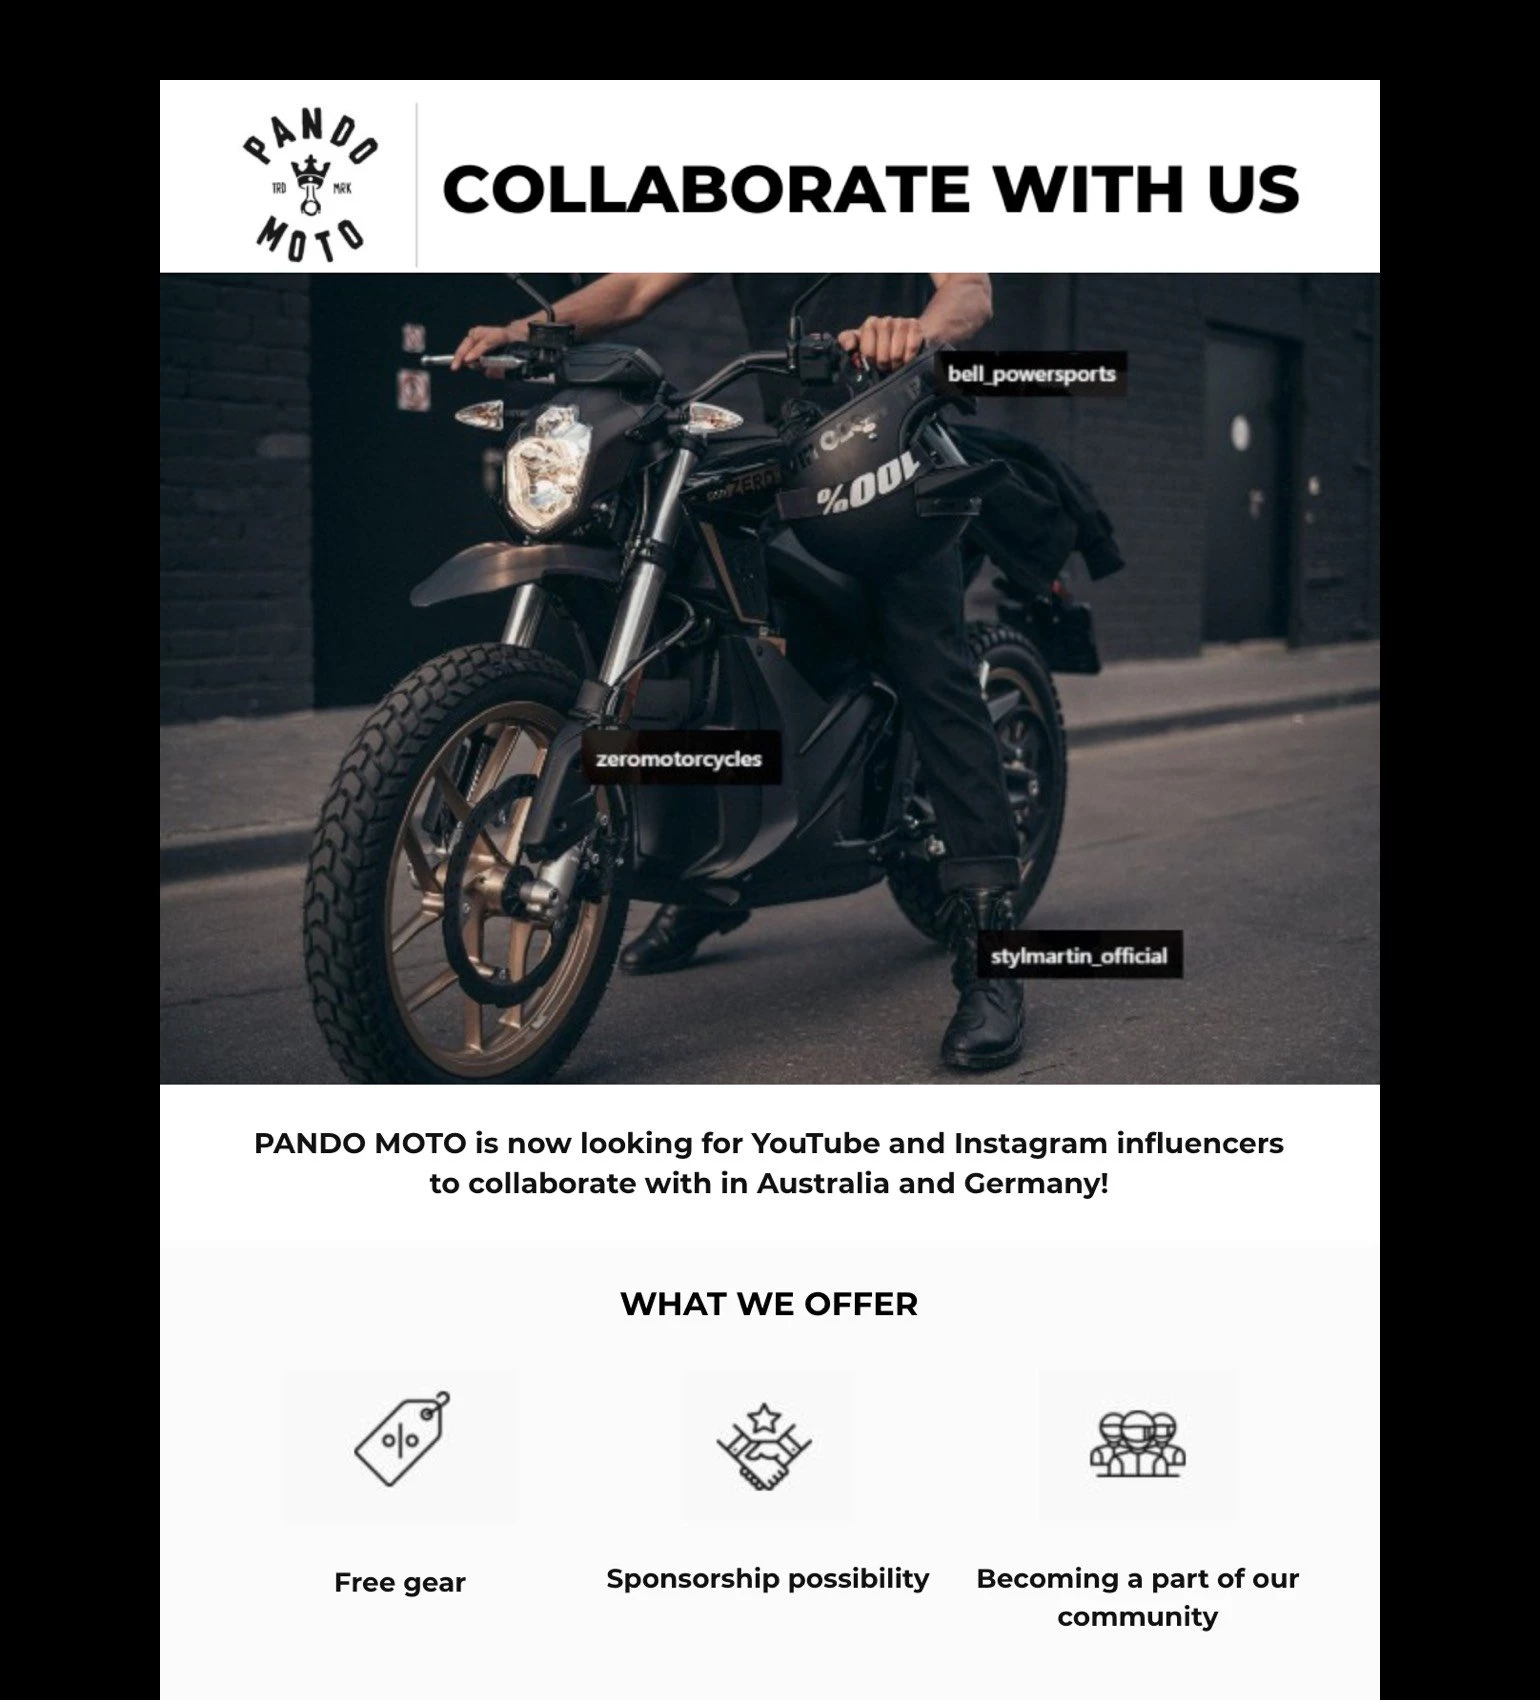 Influencers example motorcycle